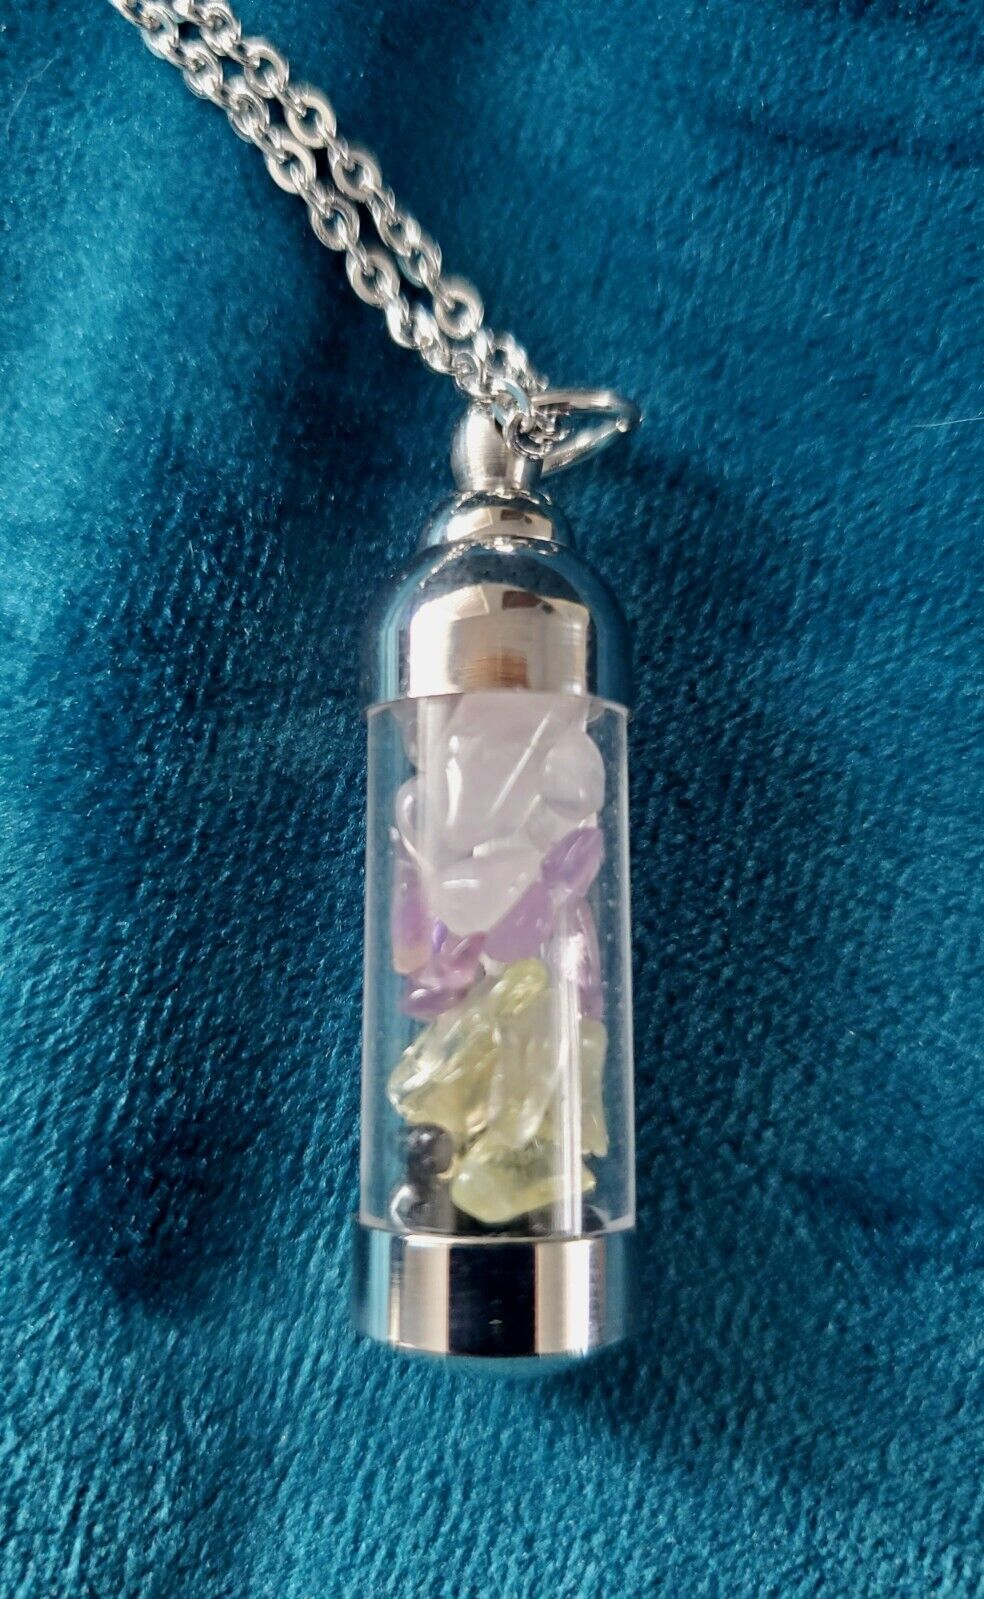 Anxiety Protection Stones Crystals Necklace Metaphysical Amethyst Quartz